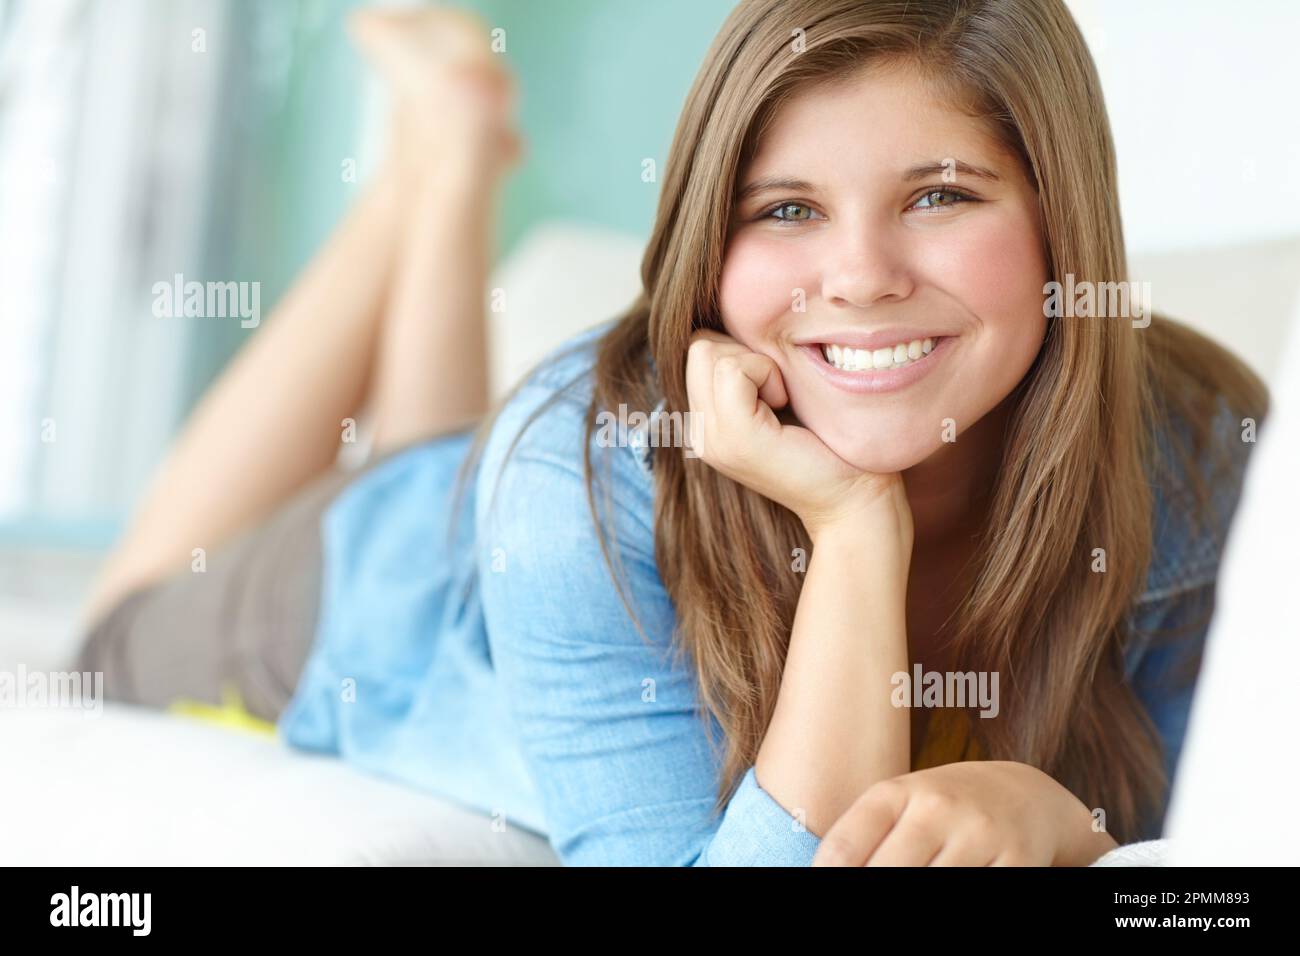 Just chilling on the couch. A pretty teenager relaxing on the couch happily. Stock Photo